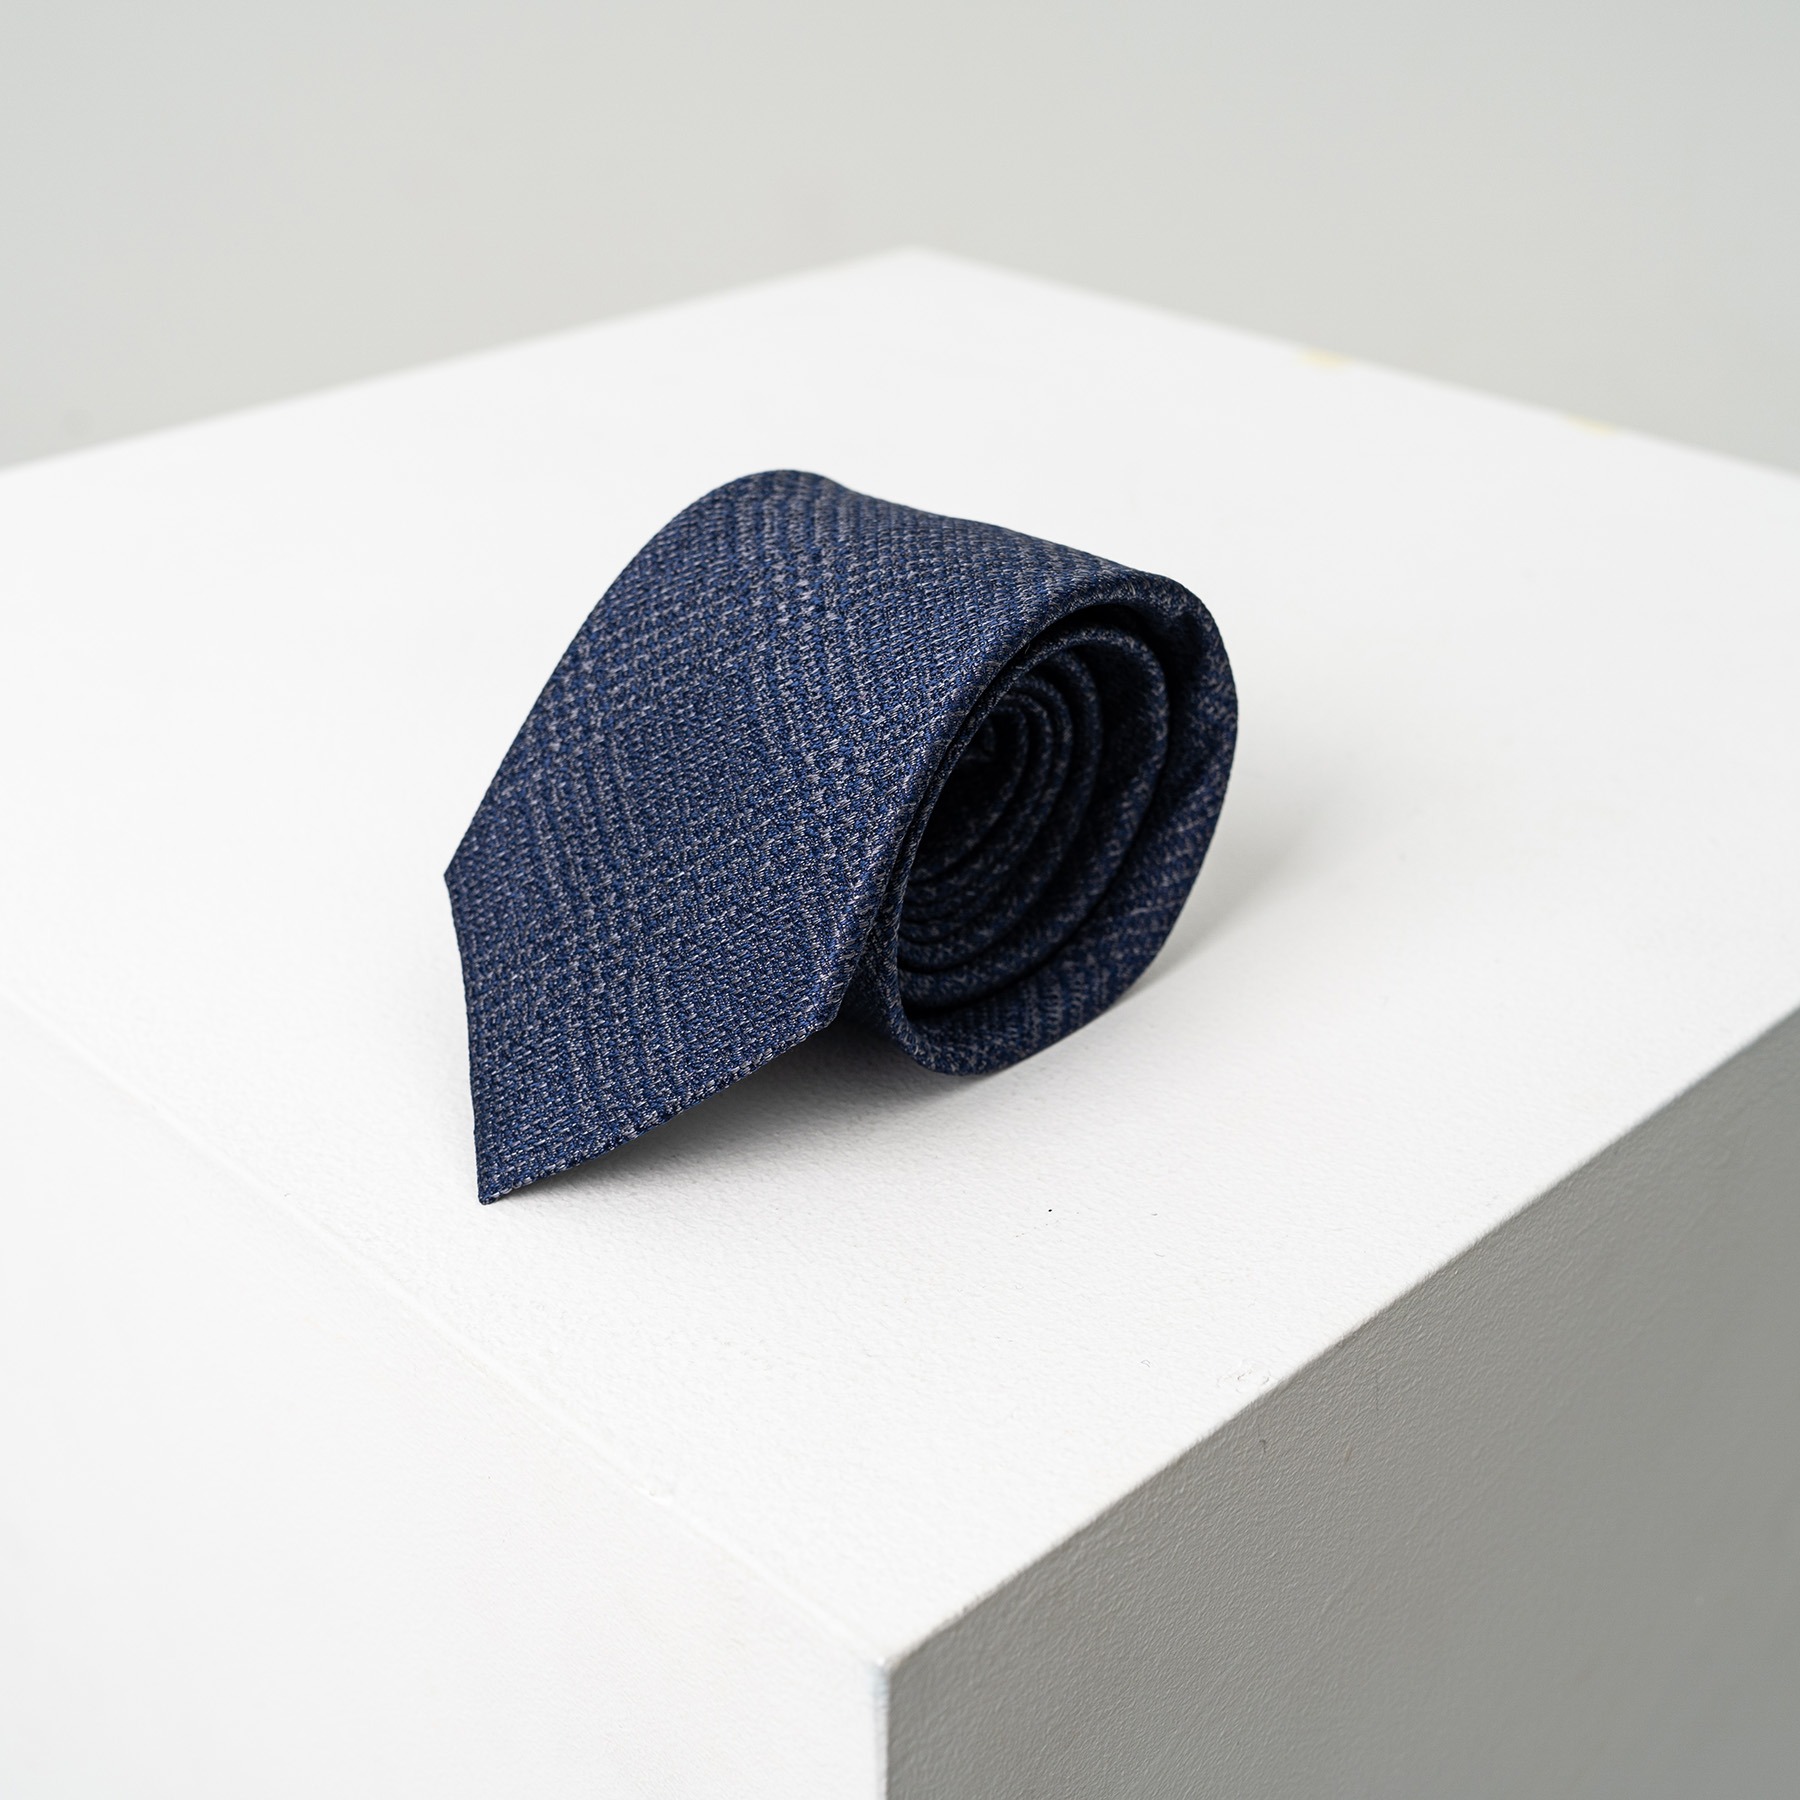 [Silk] TWO-TONE MIX CHECK TIE - NAVY